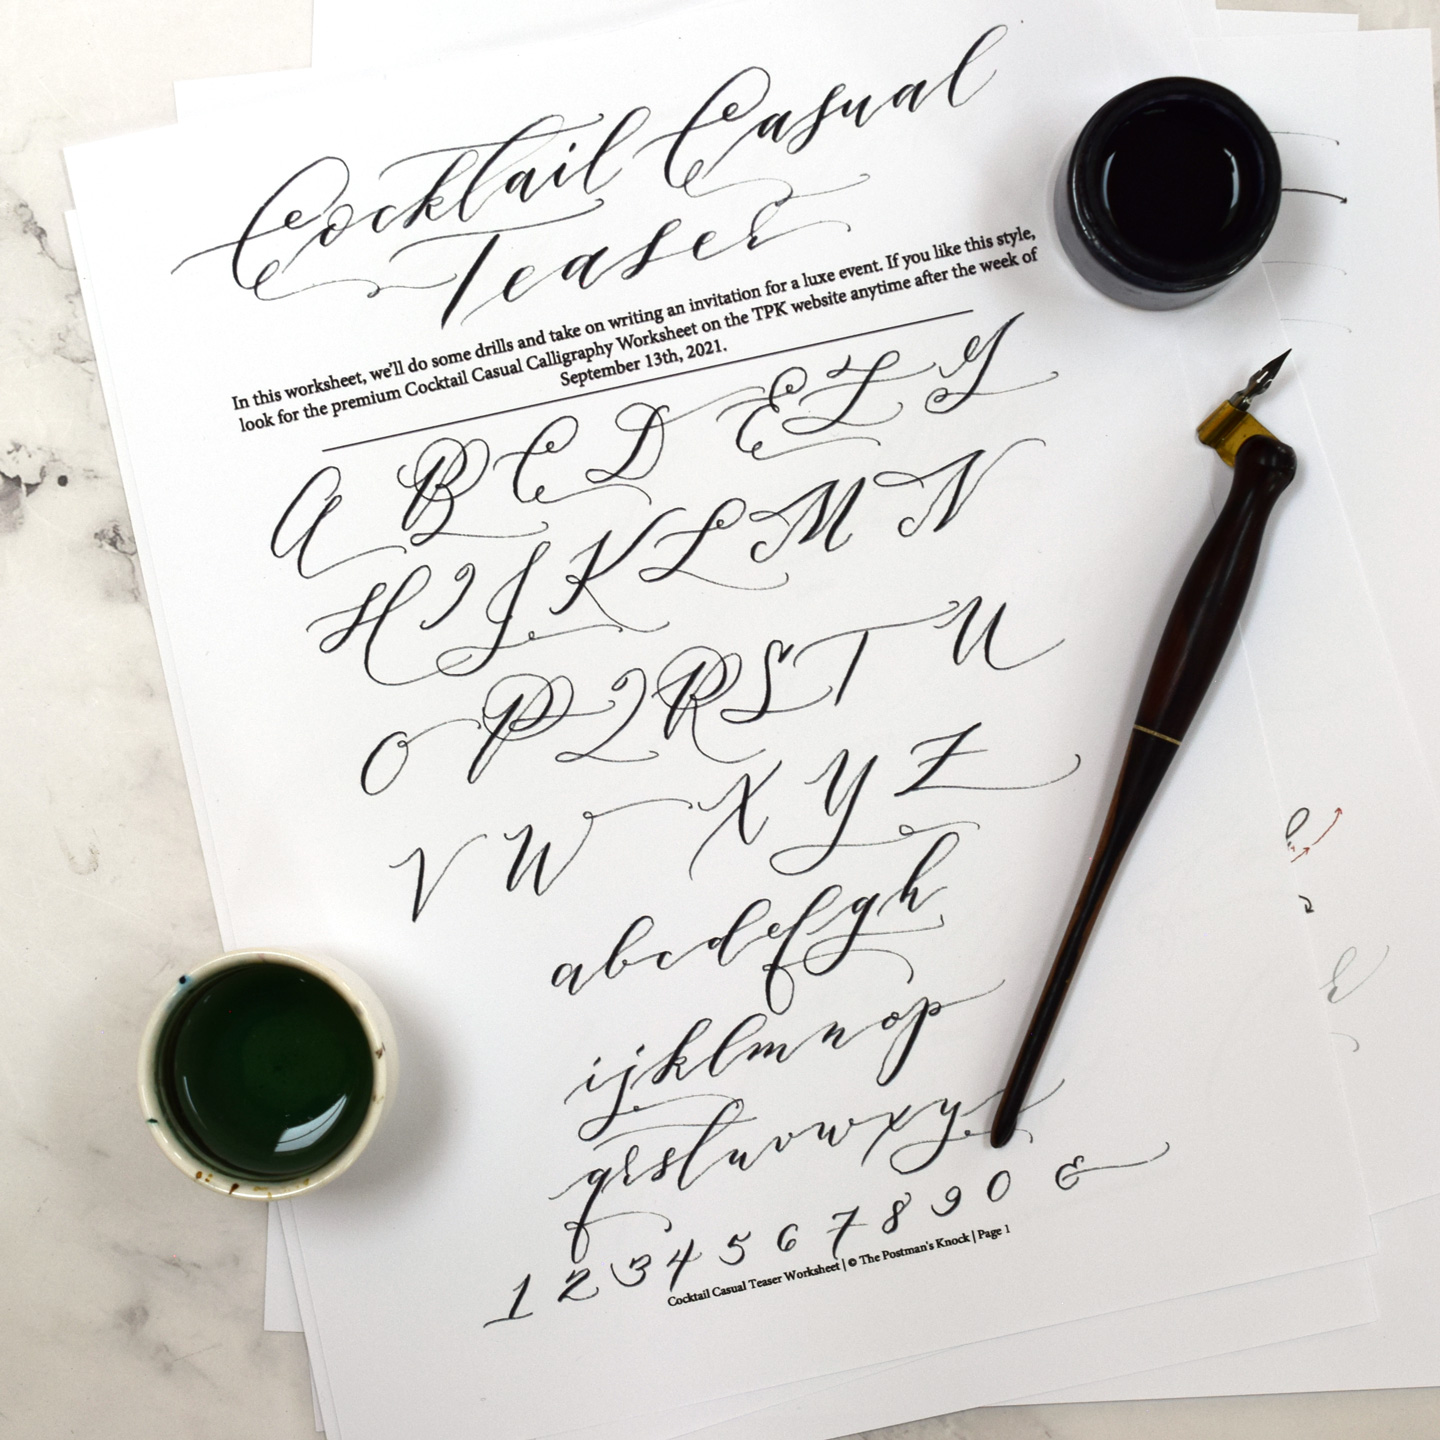 FREE Cocktail Casual Calligraphy Teaser Worksheet